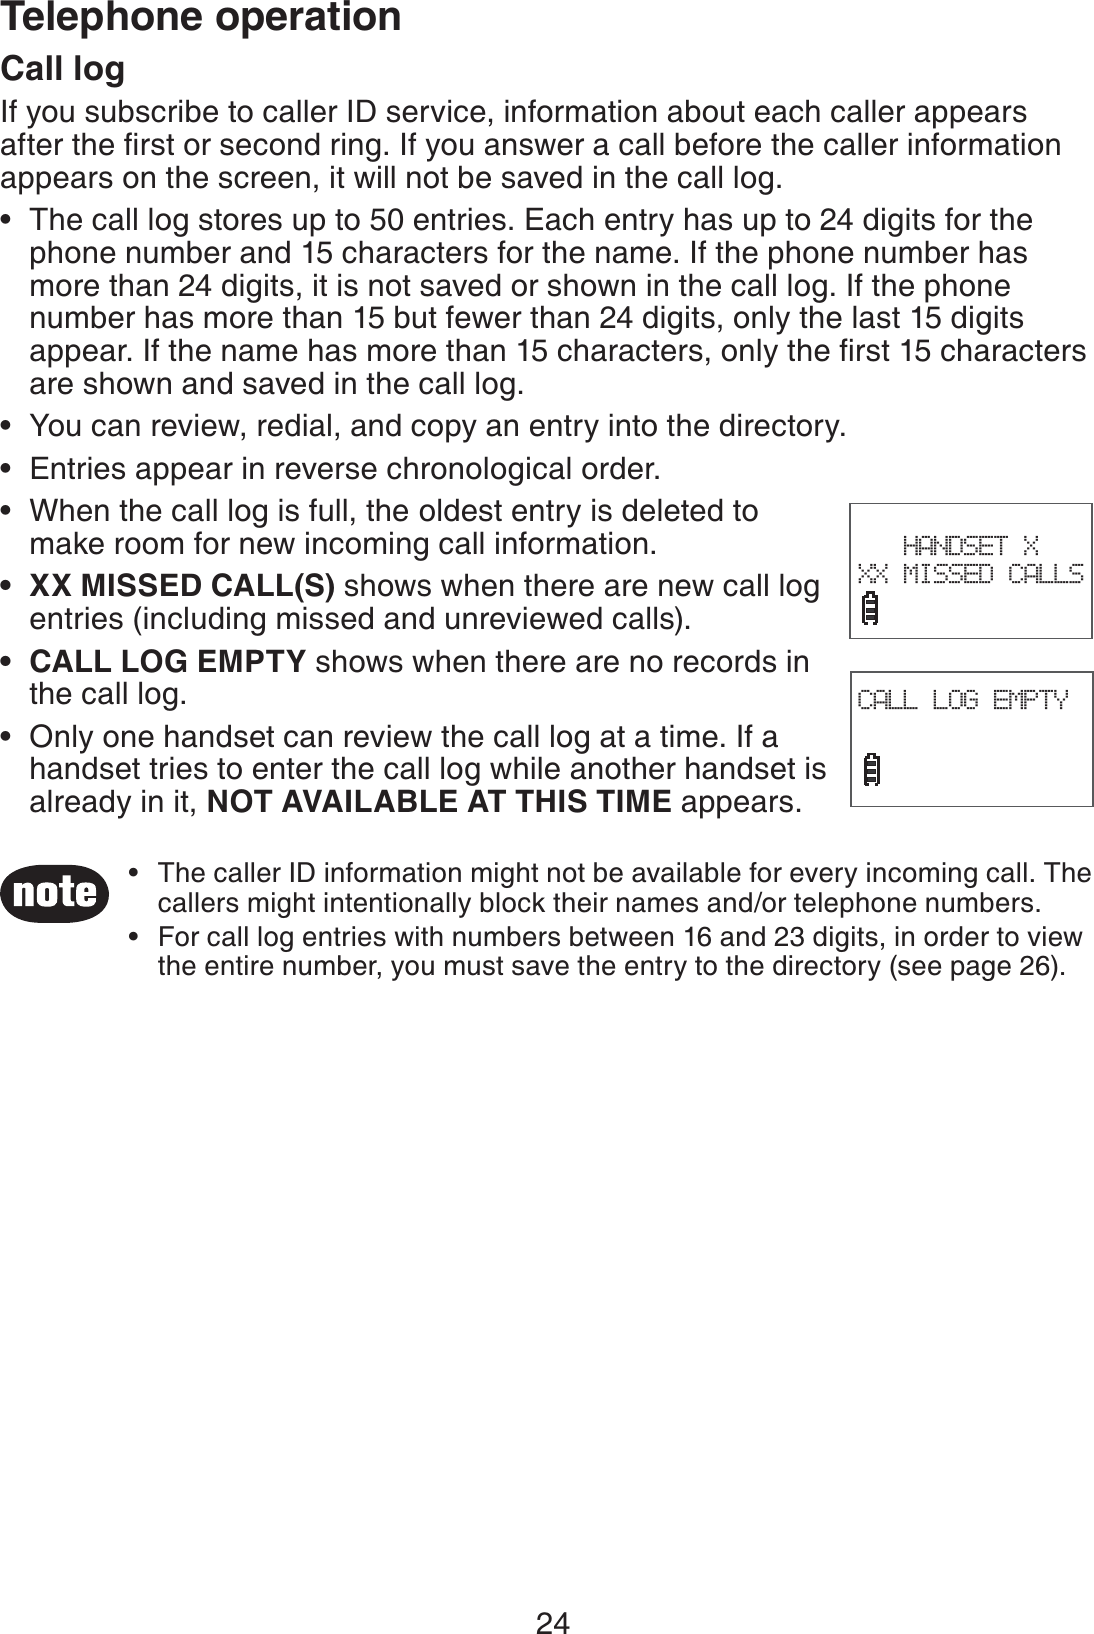 24Telephone operationCall logIf you subscribe to caller ID service, information about each caller appears after the ﬁrst or second ring. If you answer a call before the caller information appears on the screen, it will not be saved in the call log.The call log stores up to 50 entries. Each entry has up to 24 digits for the phone number and 15 characters for the name. If the phone number has more than 24 digits, it is not saved or shown in the call log. If the phone number has more than 15 but fewer than 24 digits, only the last 15 digits appear. If the name has more than 15 characters, only the ﬁrst 15 characters are shown and saved in the call log.You can review, redial, and copy an entry into the directory.Entries appear in reverse chronological order.When the call log is full, the oldest entry is deleted to make room for new incoming call information.XX MISSED CALL(S) shows when there are new call log entries (including missed and unreviewed calls).CALL LOG EMPTY shows when there are no records in the call log.Only one handset can review the call log at a time. If a handset tries to enter the call log while another handset is already in it, NOT AVAILABLE AT THIS TIME appears.•••••••The caller ID information might not be available for every incoming call. The callers might intentionally block their names and/or telephone numbers.For call log entries with numbers between 16 and 23 digits, in order to view the entire number, you must save the entry to the directory (see page 26). ••HANDSET X XX MISSED CALLSCALL LOG EMPTY